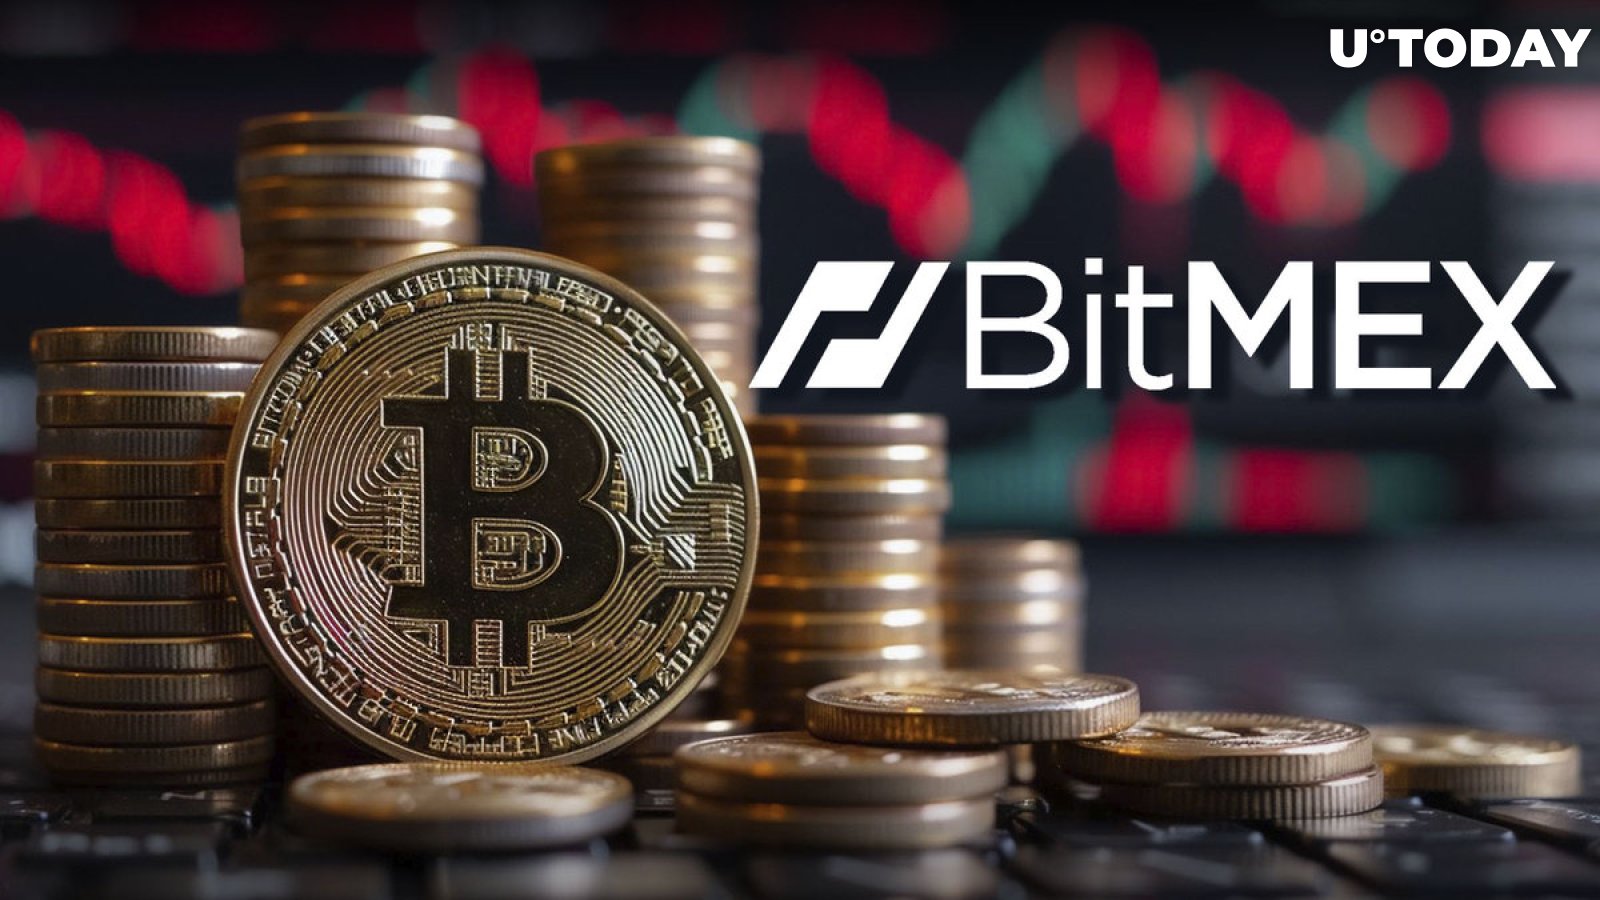 This Bitcoin (BTC) Halving Will Be Special, BitMEX Research Says